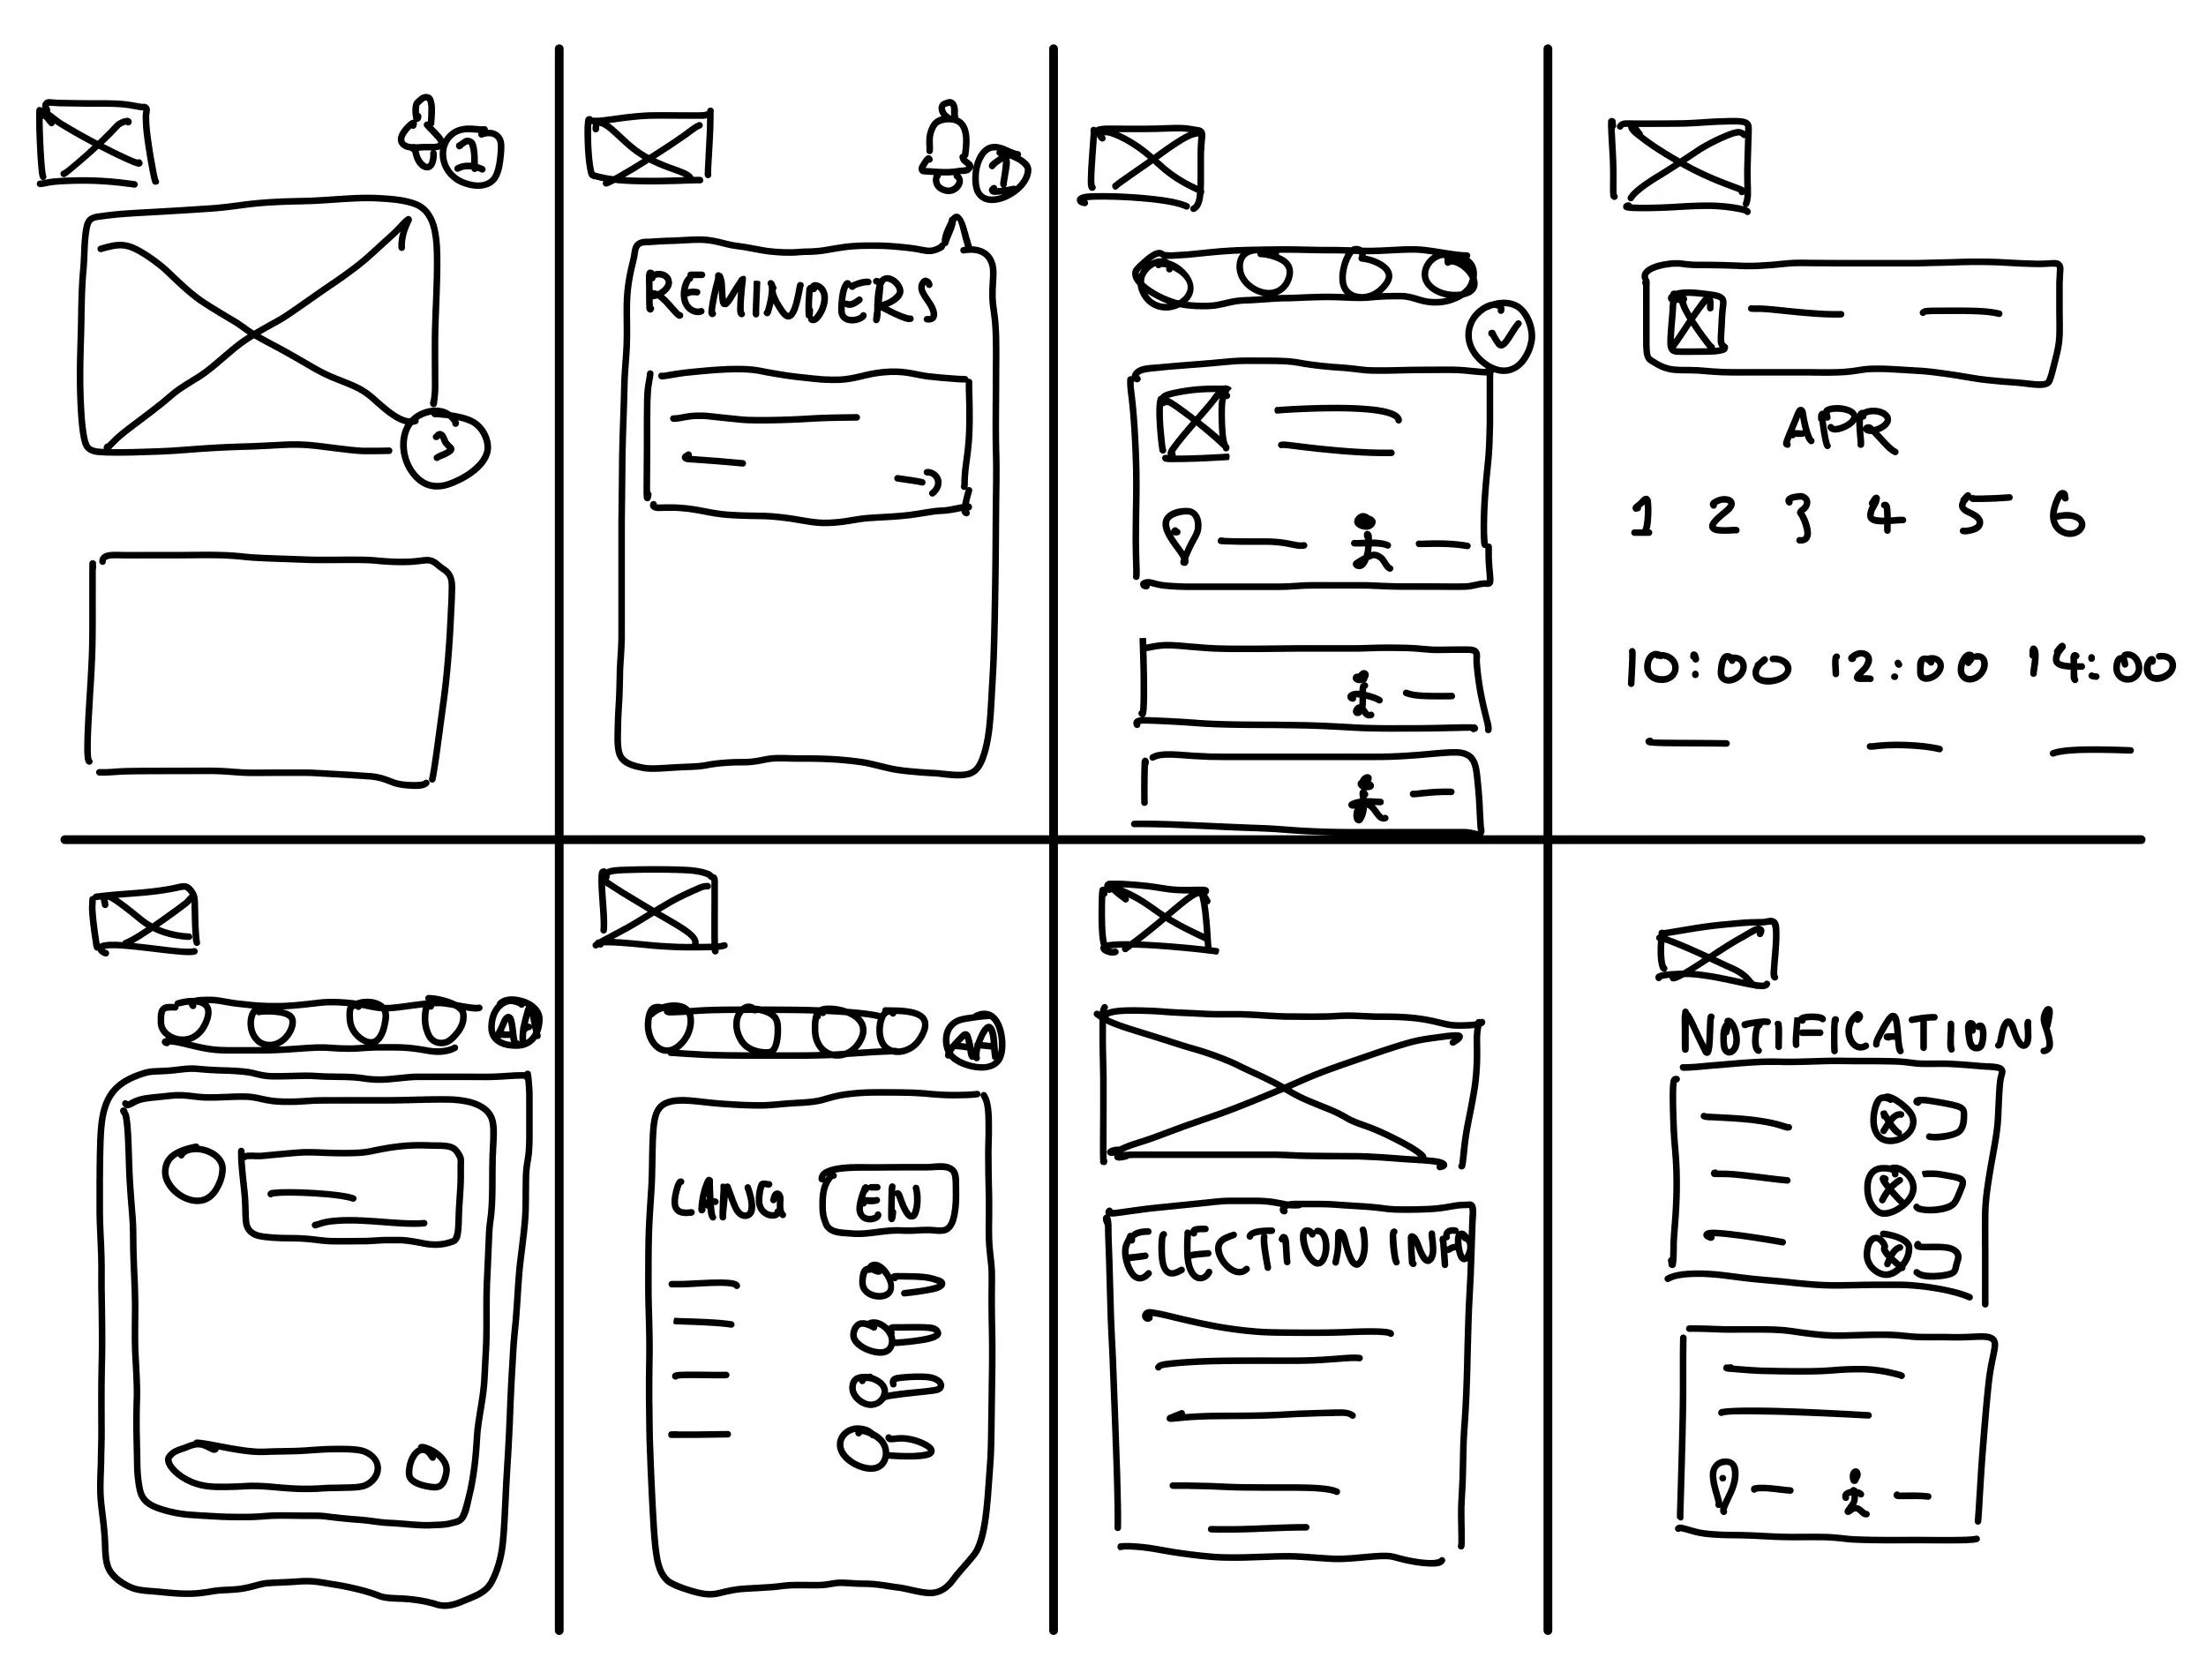 Crazy eight sketches of solutions to user pain points